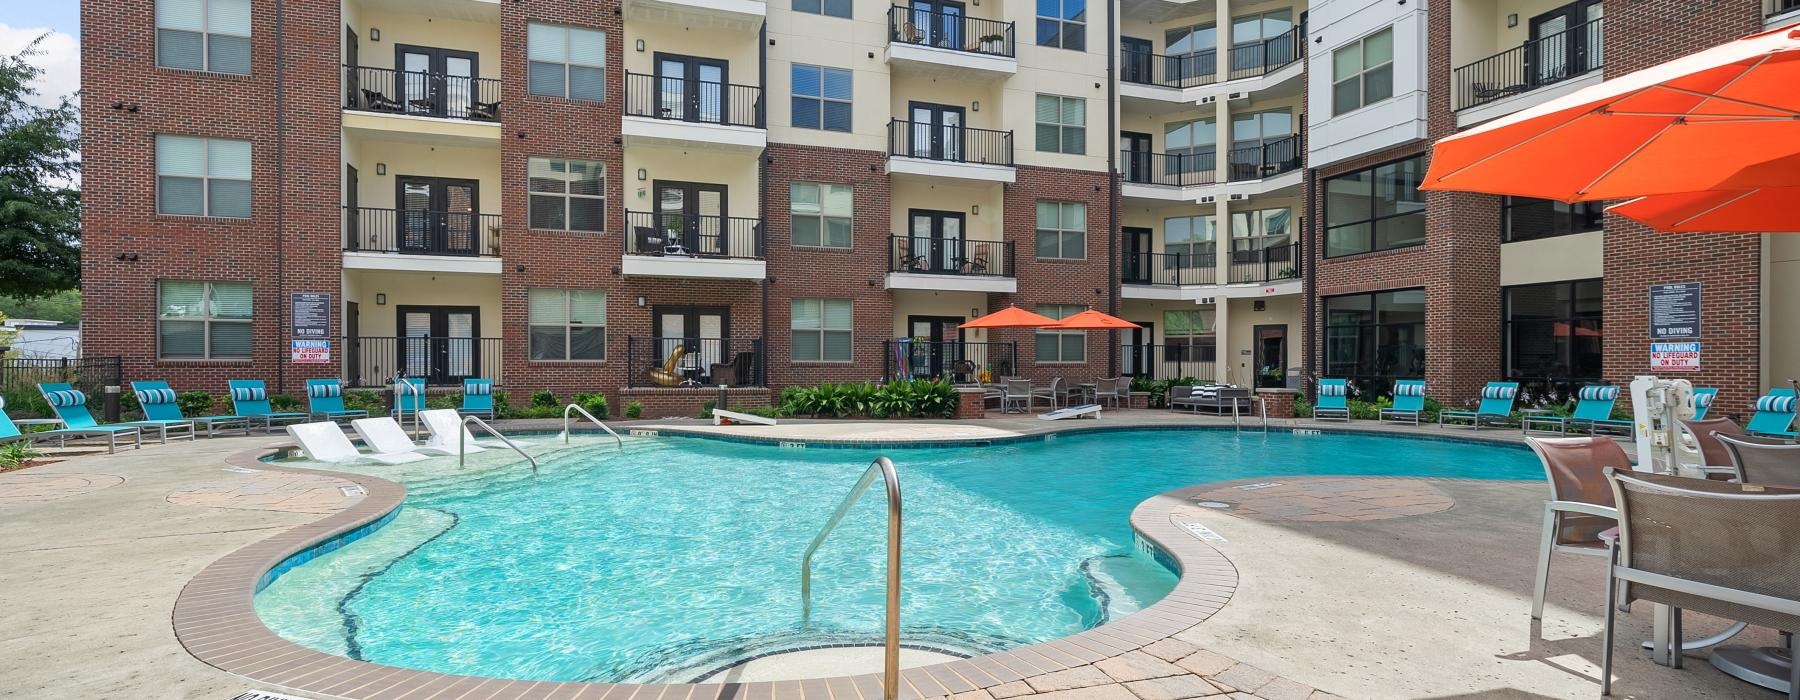 Resort-style pool with sun deck and lounge areas, set against the backdrop of Jones Grant luxury apartments in Raleigh, NC.